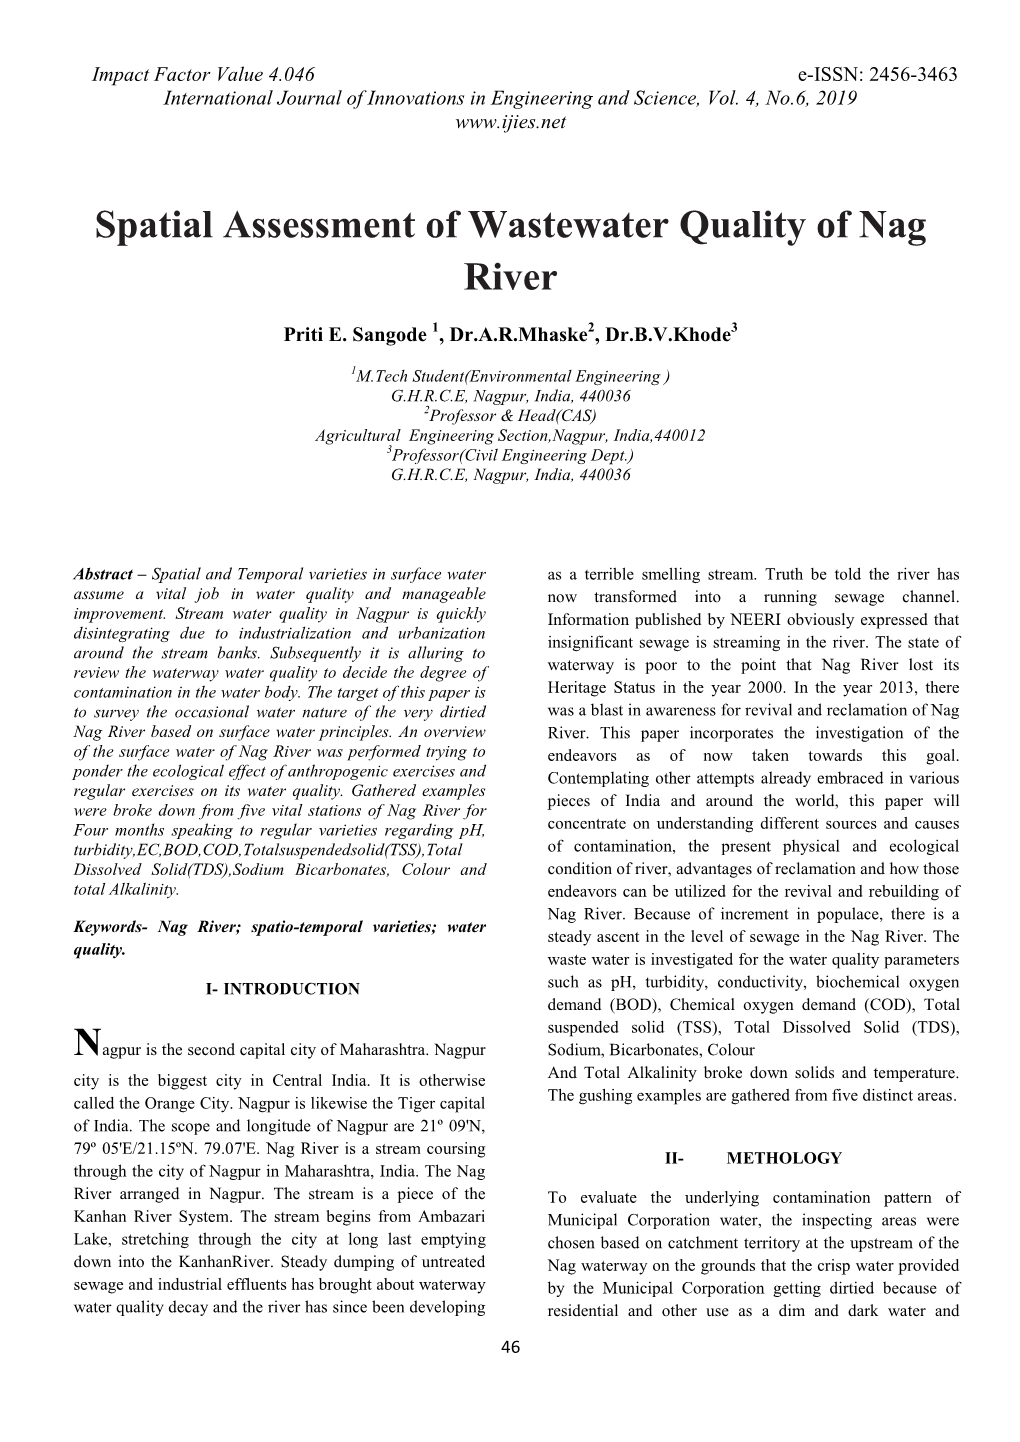 Spatial Assessment of Wastewater Quality of Nag River